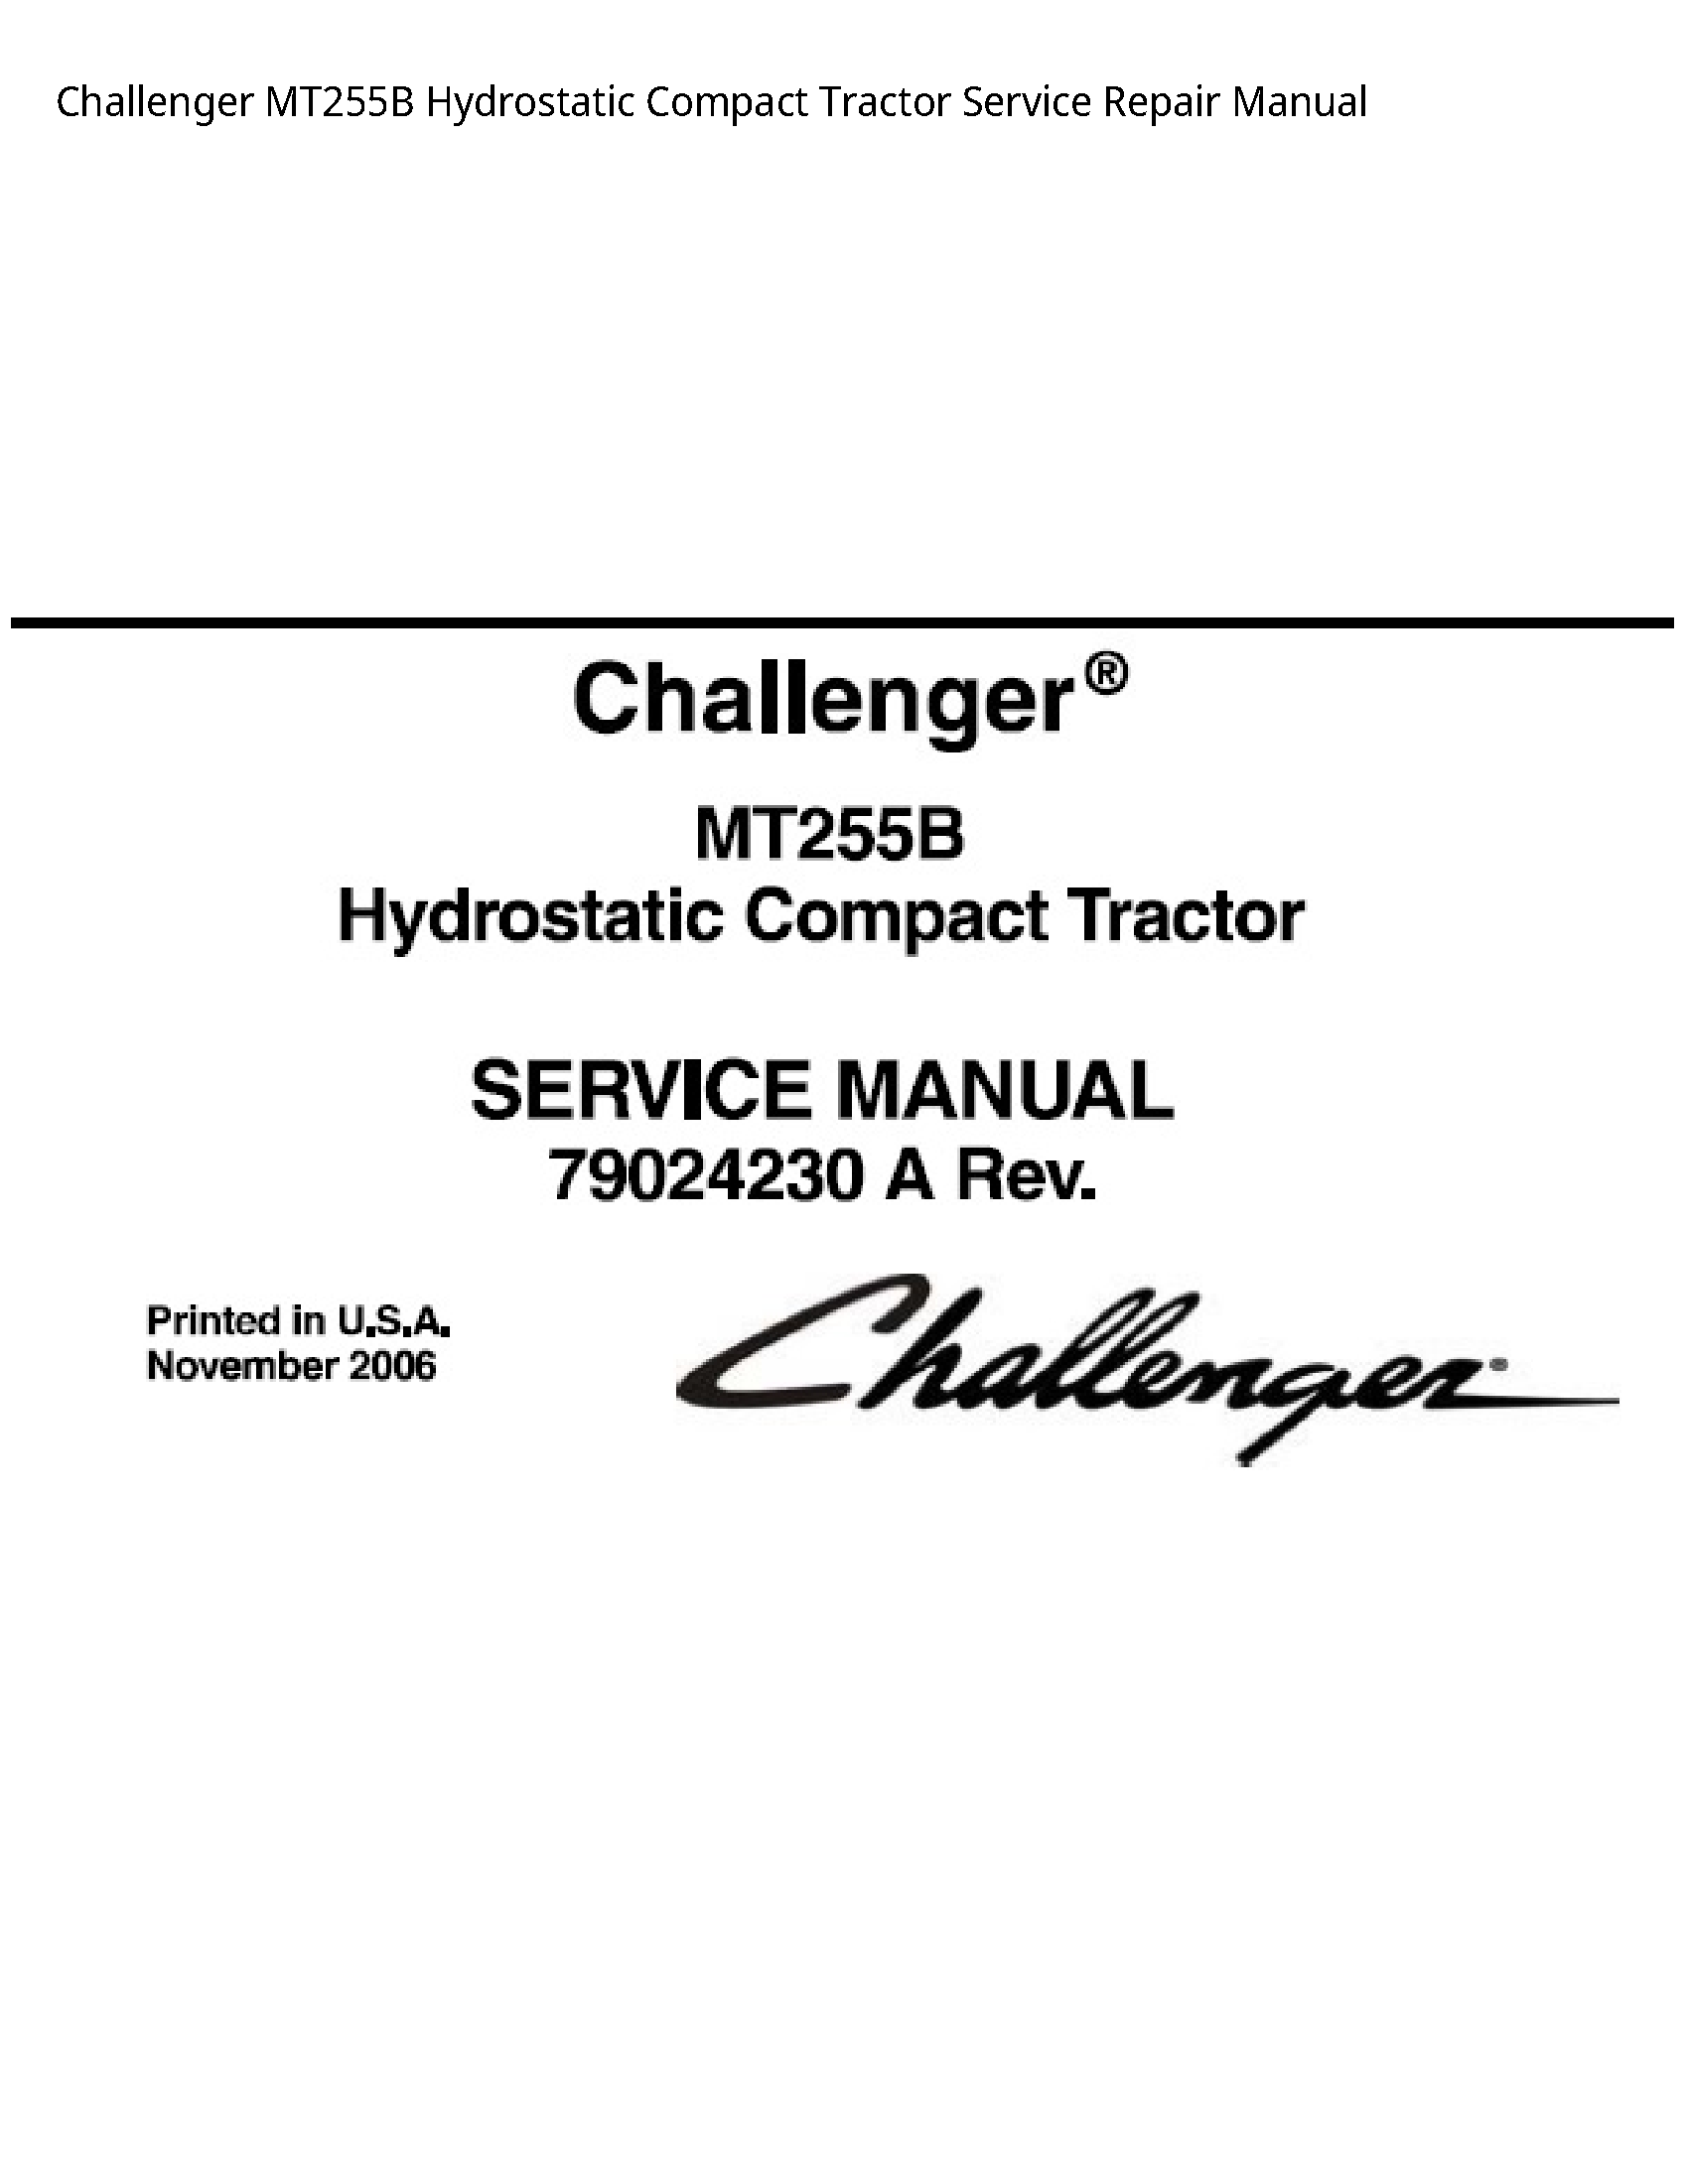 Challenger MT255B Hydrostatic Compact Tractor manual